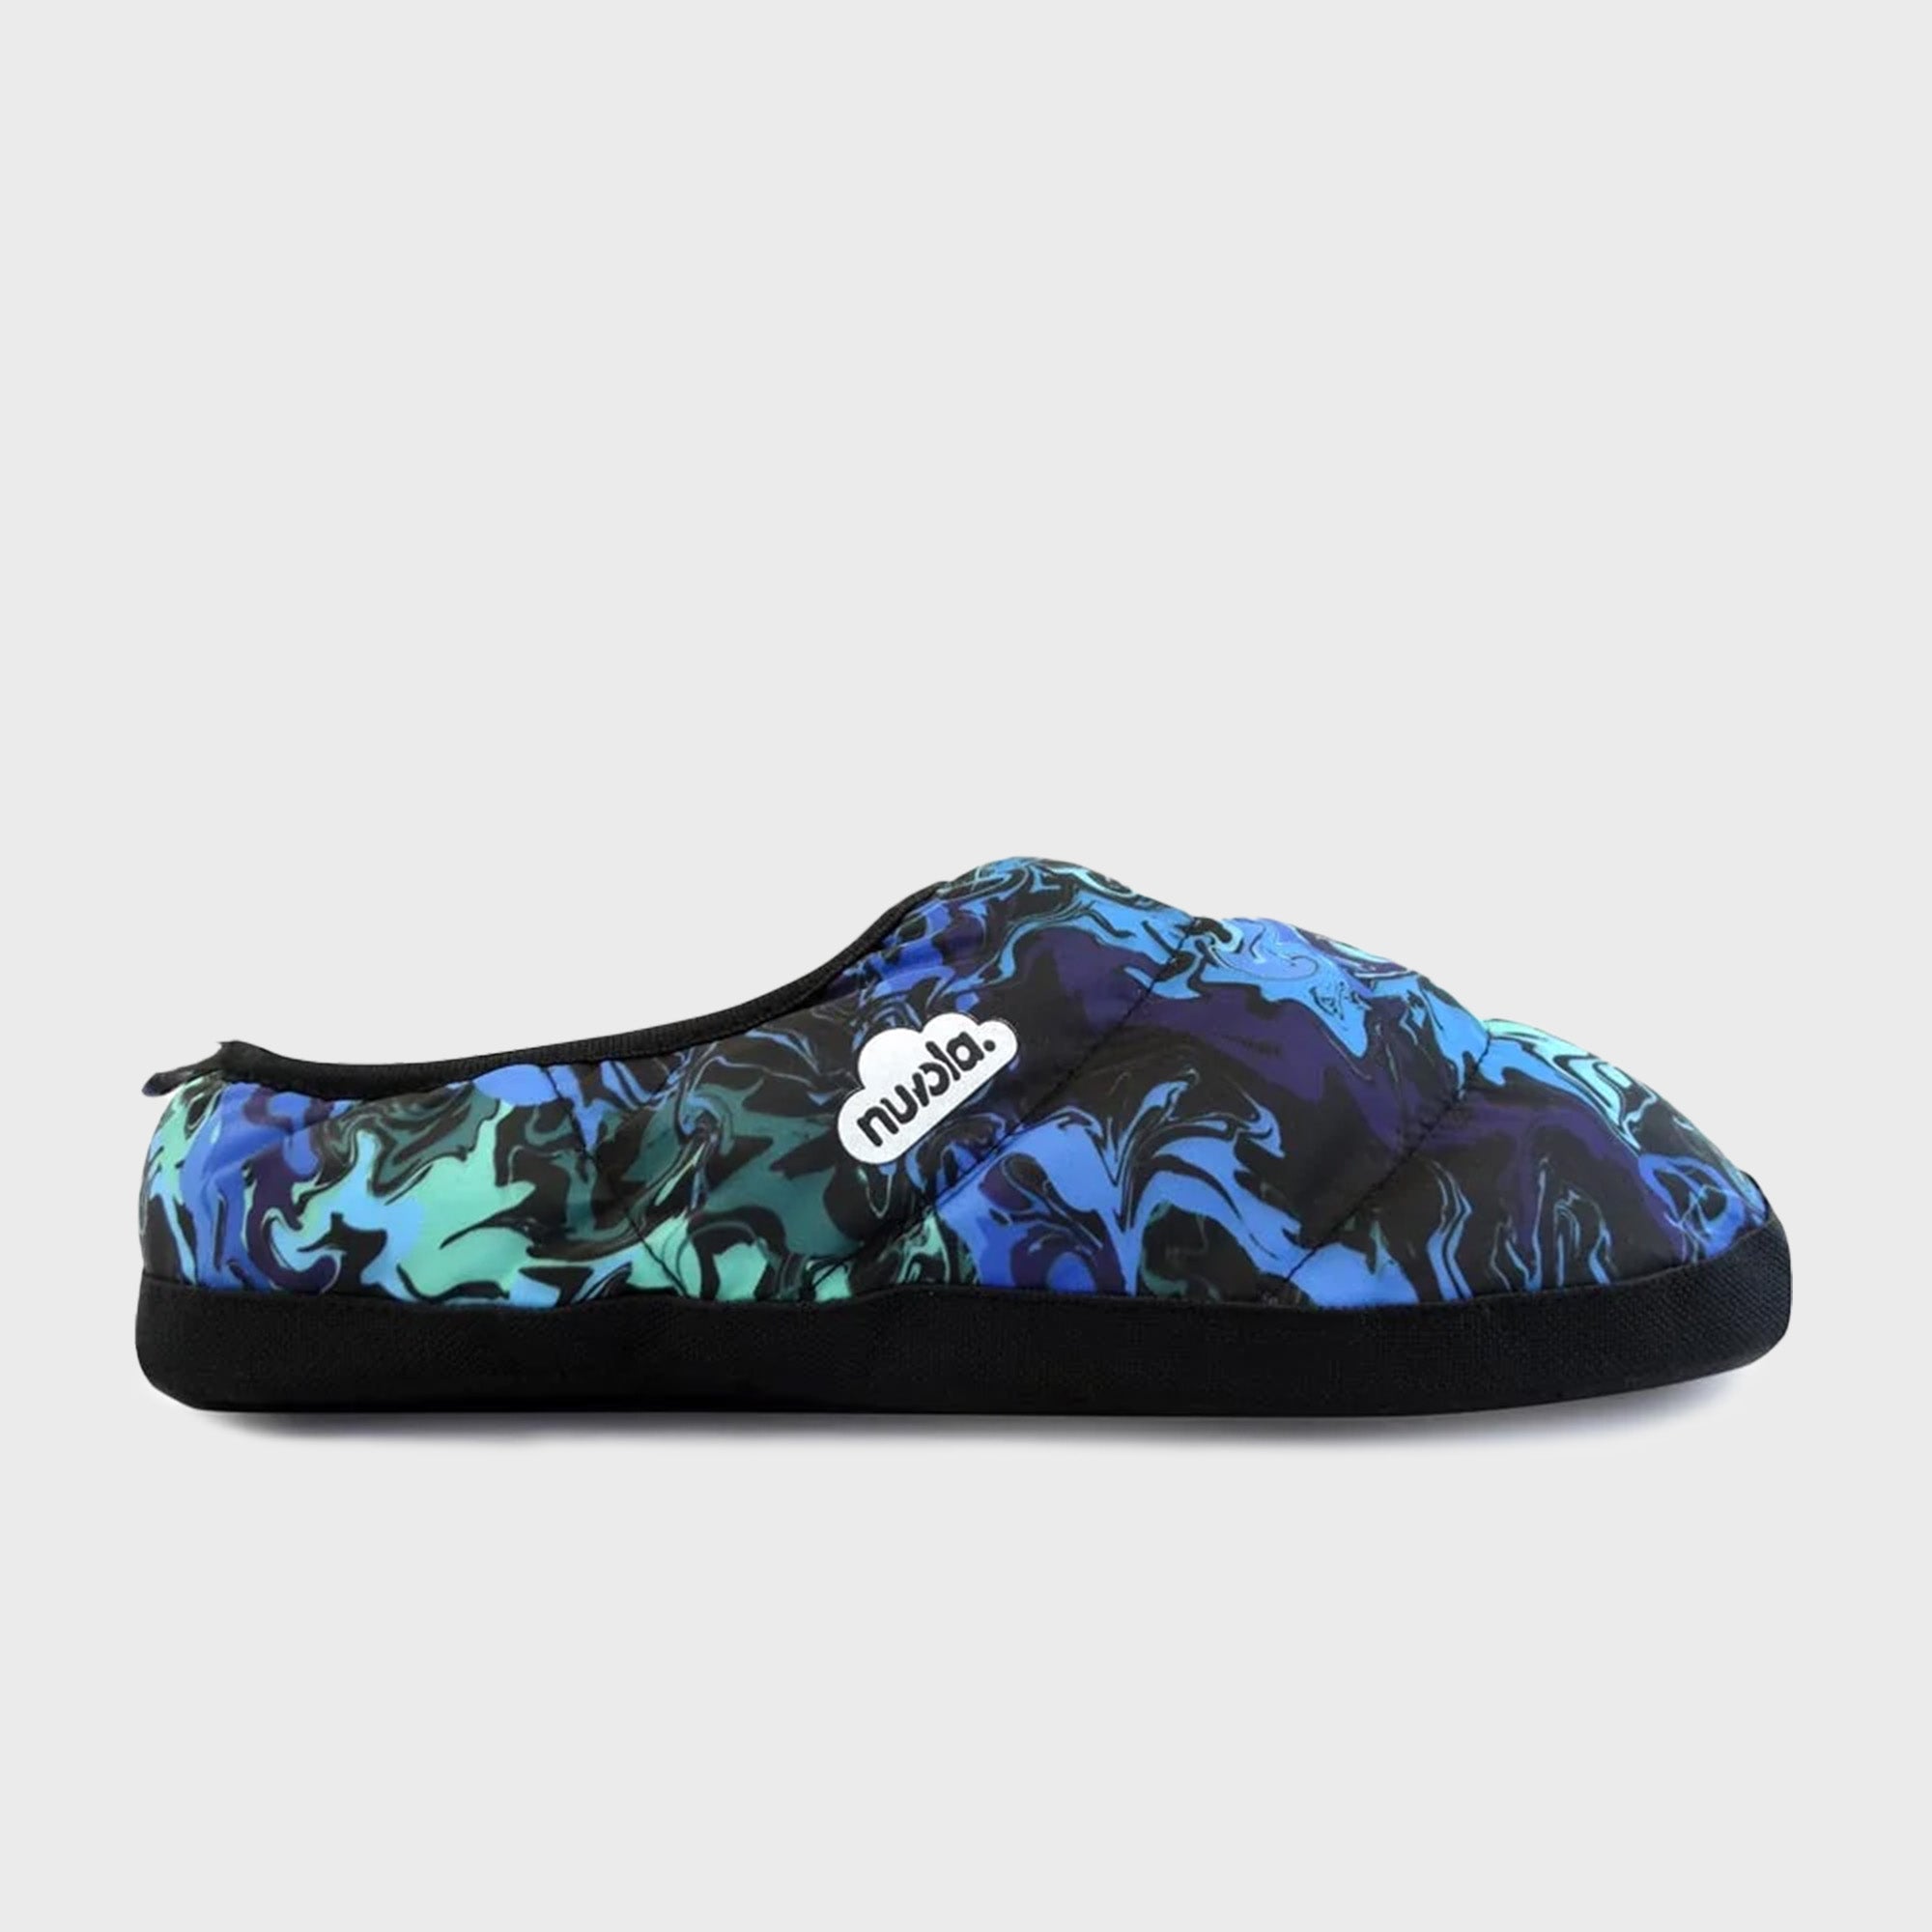 Nuvola Classic Print Slippers in Ink Blue CNCLPR20INK19 FROM EIGHTYWINGOLD - OFFICIAL BRAND PARTNER